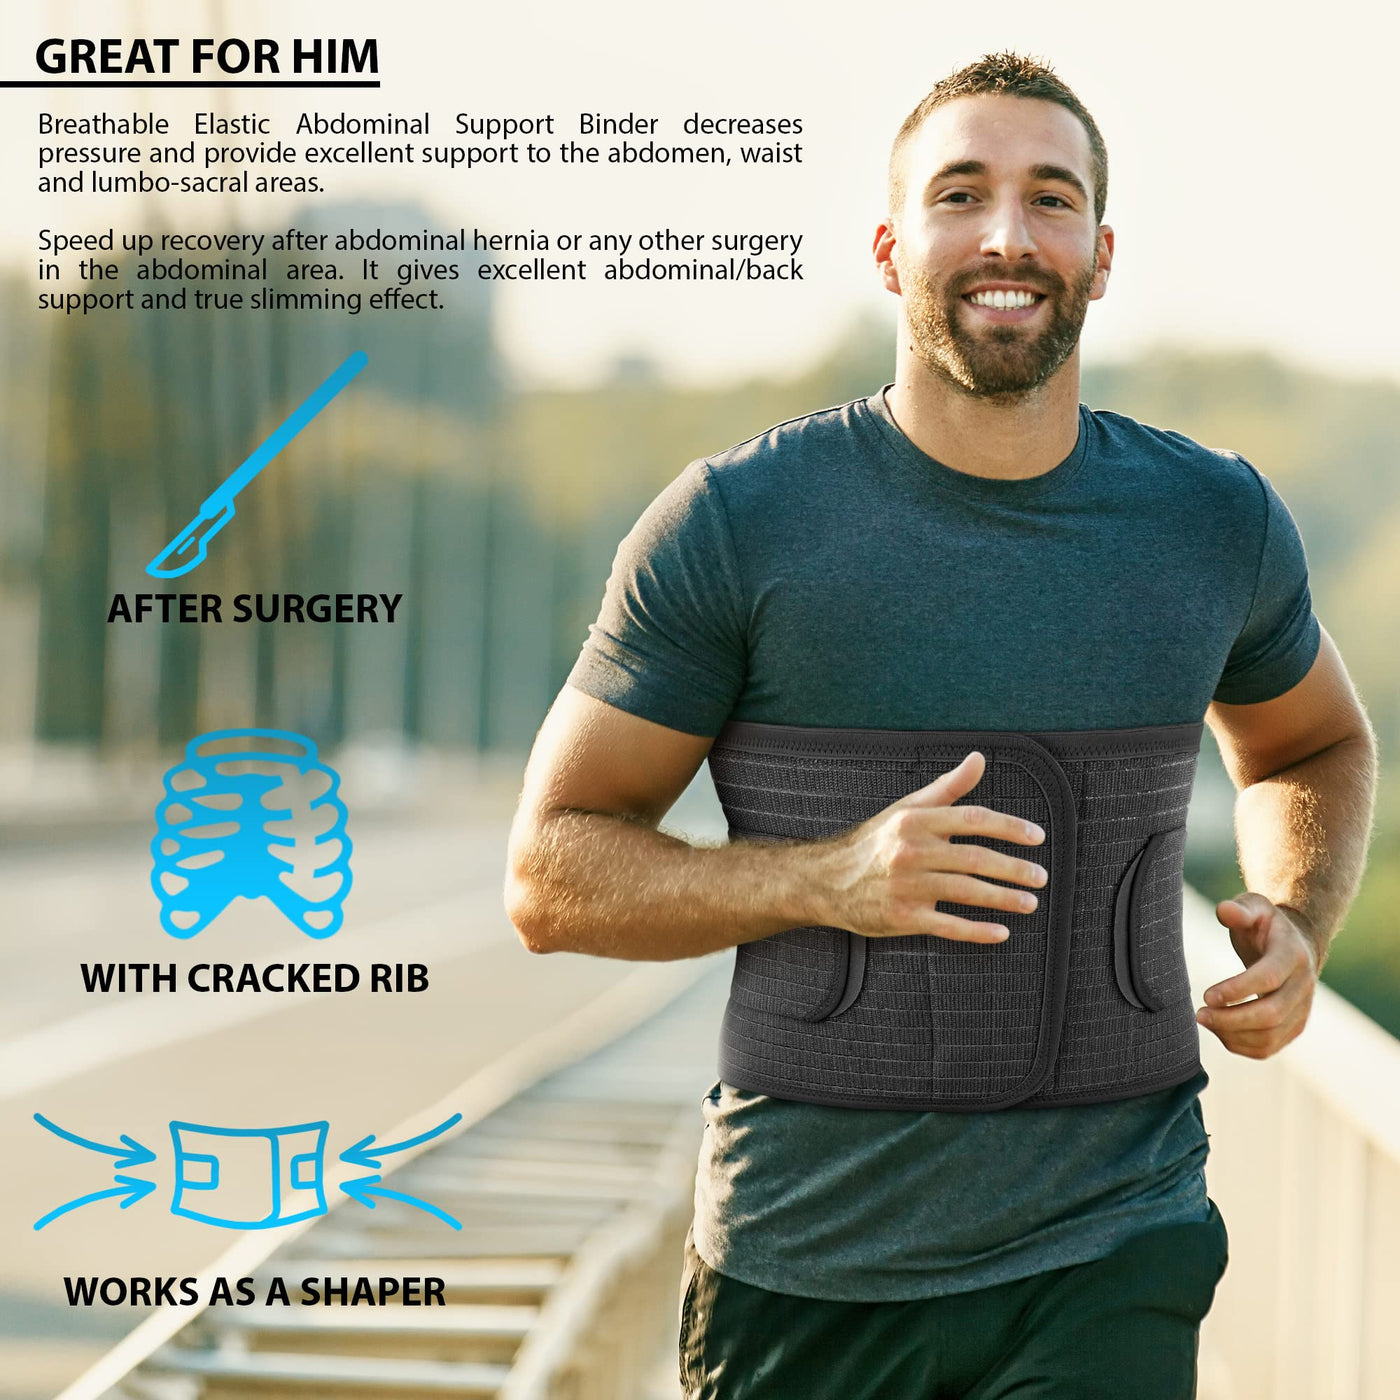 ITA-MED Men's Breathable Elastic Abdominal Binder for Post-Surgery Recovery  & Umbilical Hernia Support, 9” Wide, Body-Shaping Effect, Made in USA